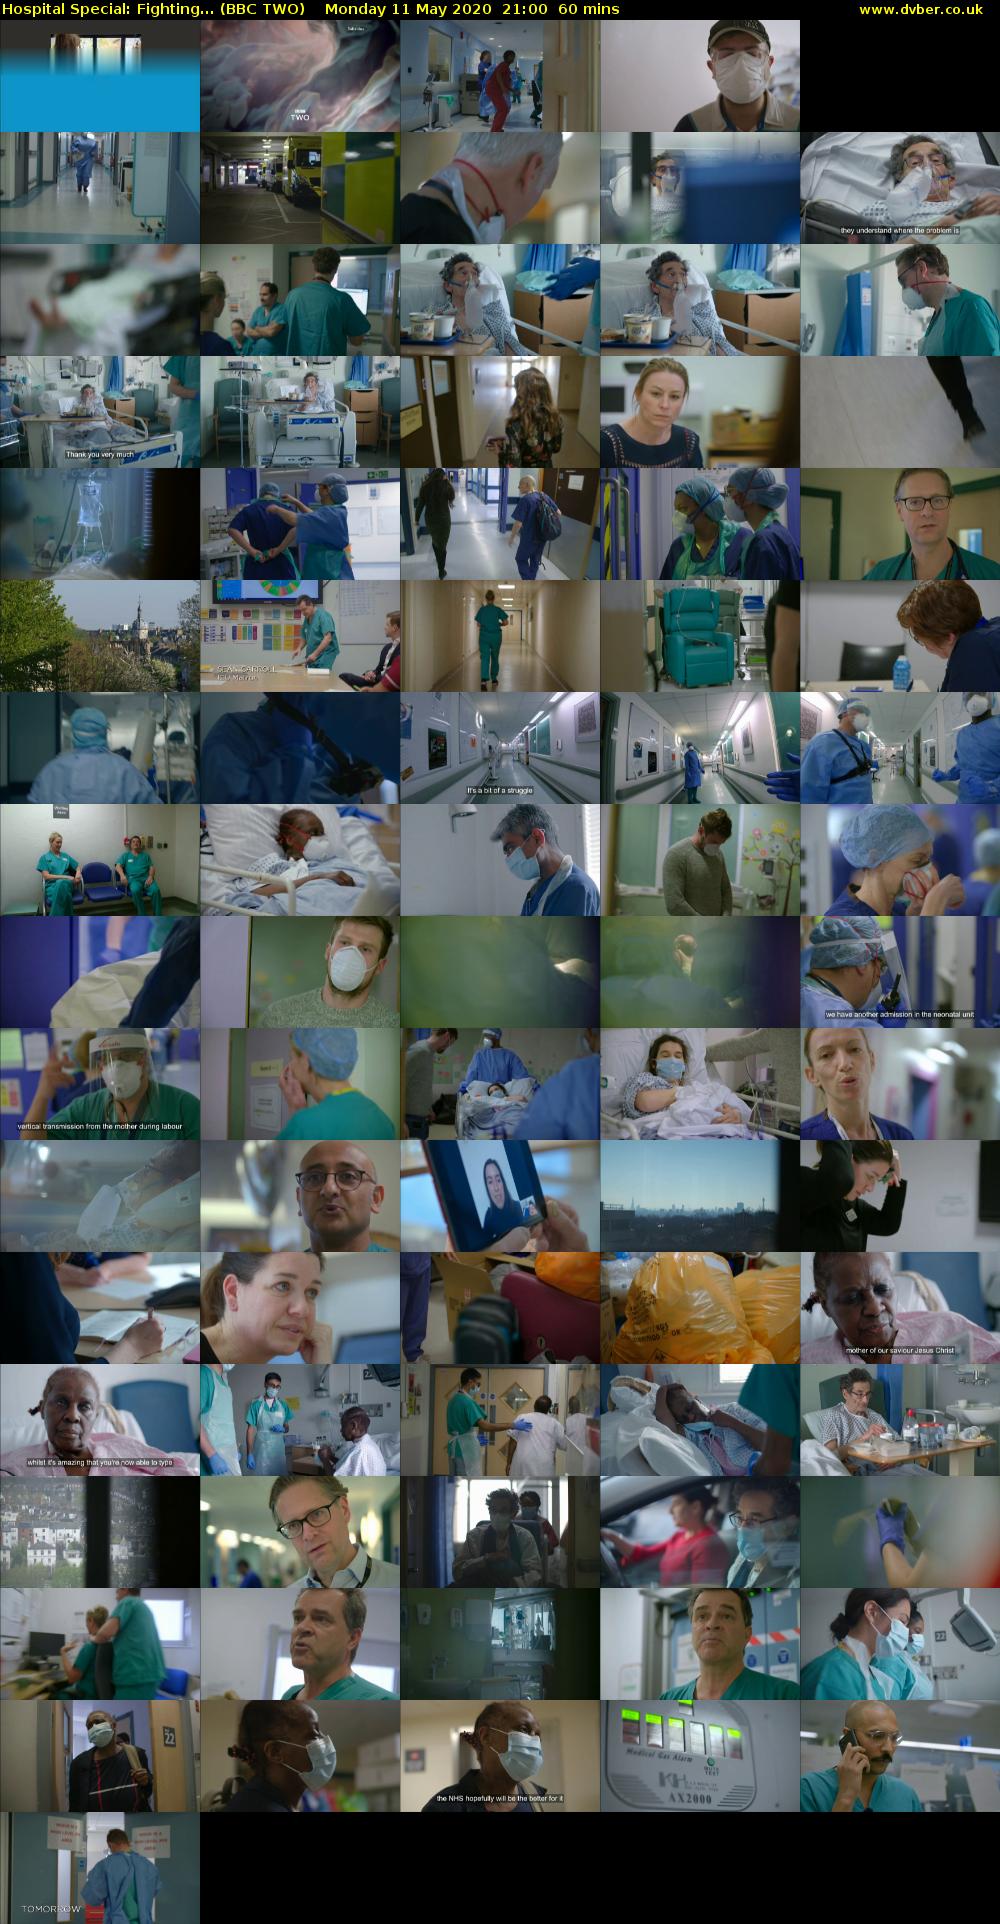 Hospital Special: Fighting... (BBC TWO) Monday 11 May 2020 21:00 - 22:00